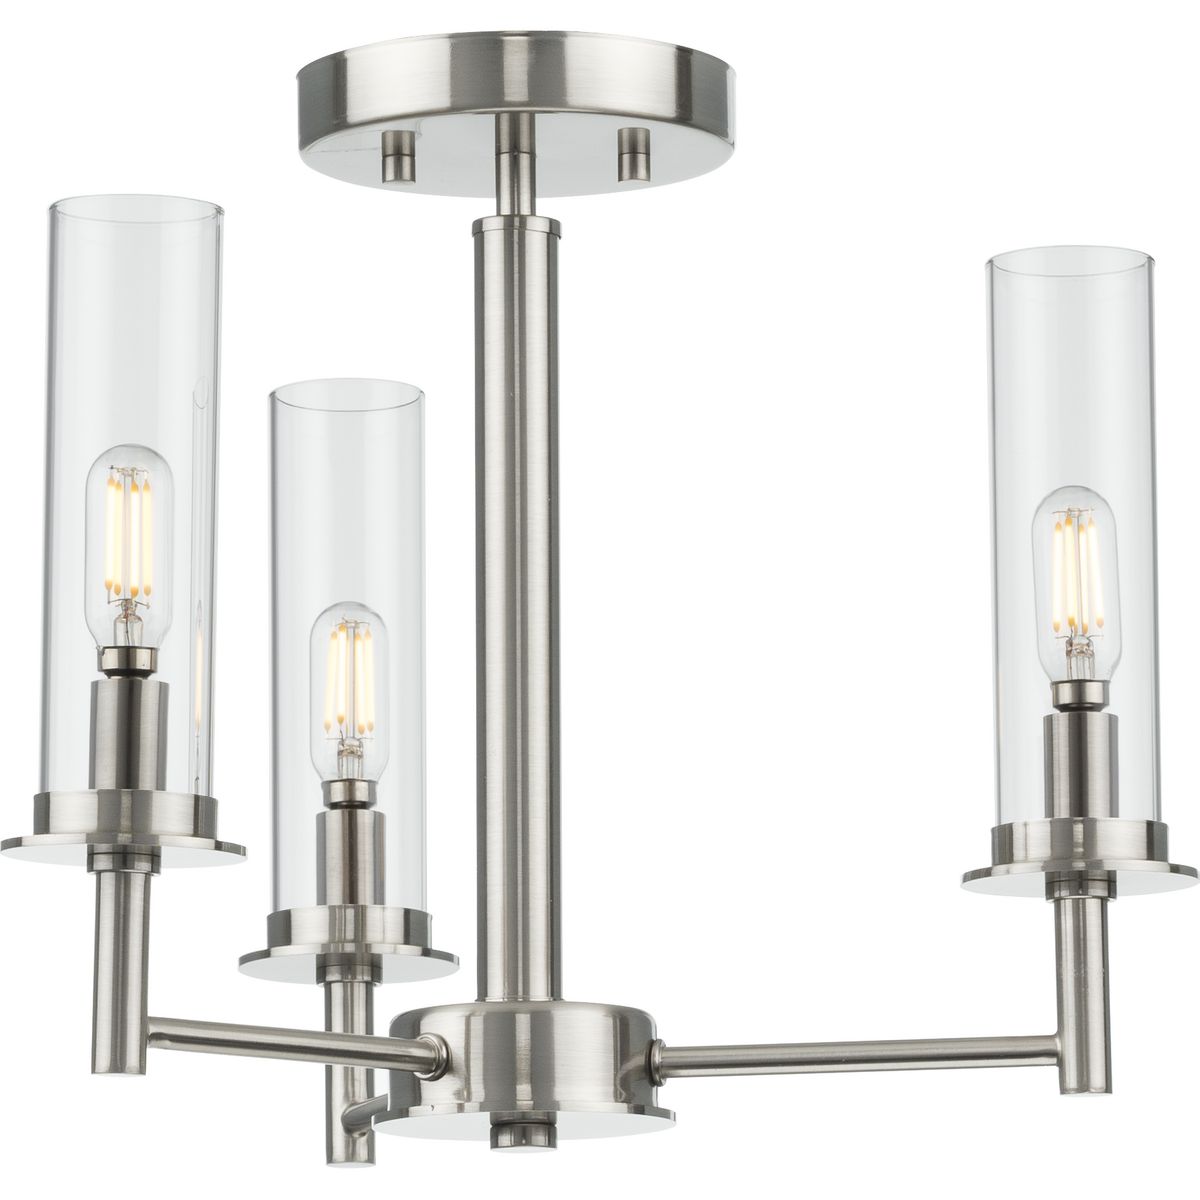 Kellwyn Collection Three-Light Brushed Nickel and Clear Glass Transitional Style Convertible Semi-Flush Ceiling or Hanging Pendant Light - Dry Location Listed